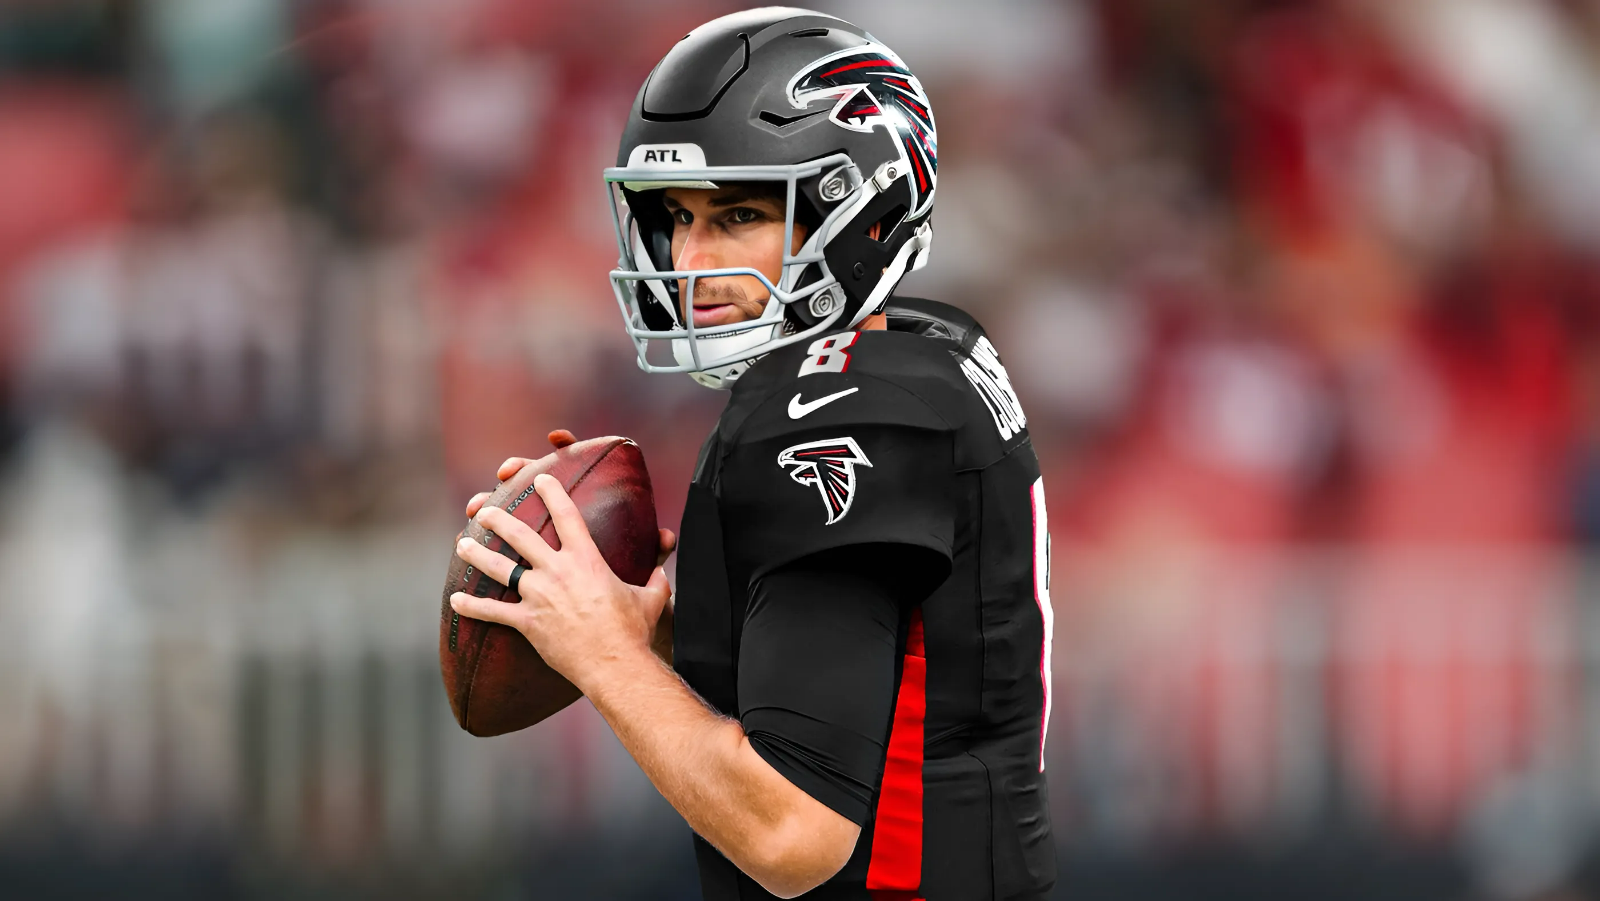 REPORT: Atlanta Falcons Can Still Trade Kirk Cousins As Early As 2024, According To NFL Insider